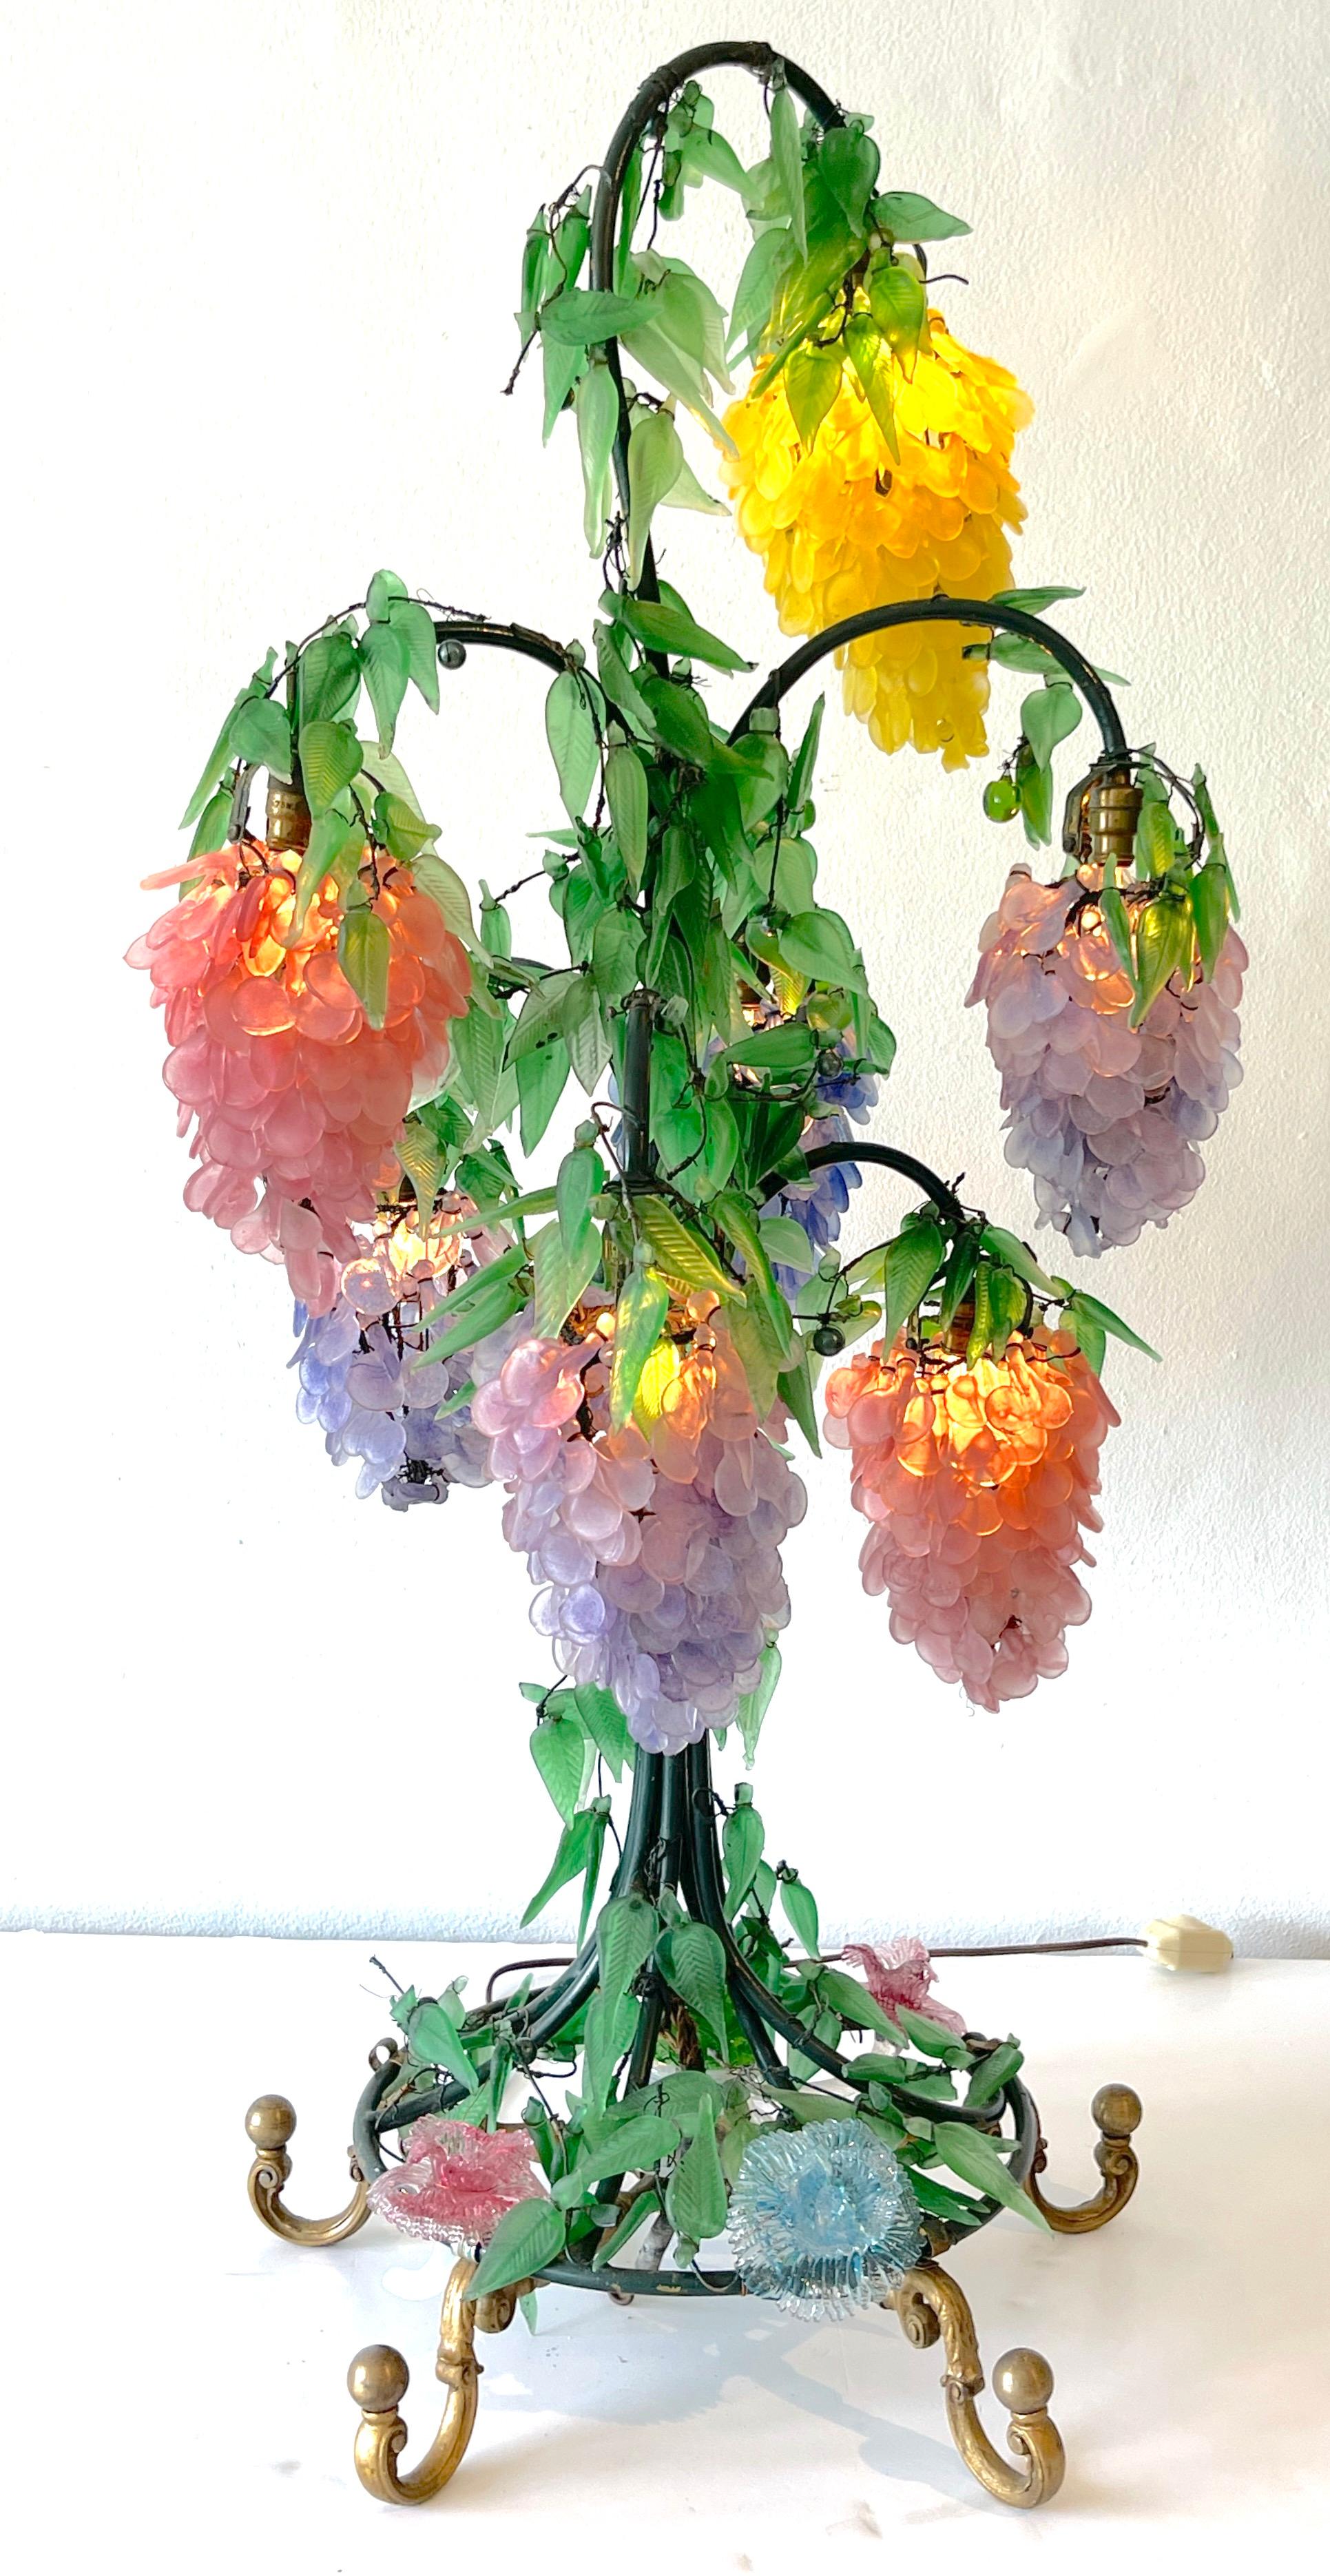 Murano Glass Multi-Colored Wisteria 7 Tiered table lamp, 
Italy, Circa 1950s
A monumental masterwork of the Murano glass works, most often these intricate lamps are clusters of fruits. 
This version standing 40-inches tall with graduating colorful